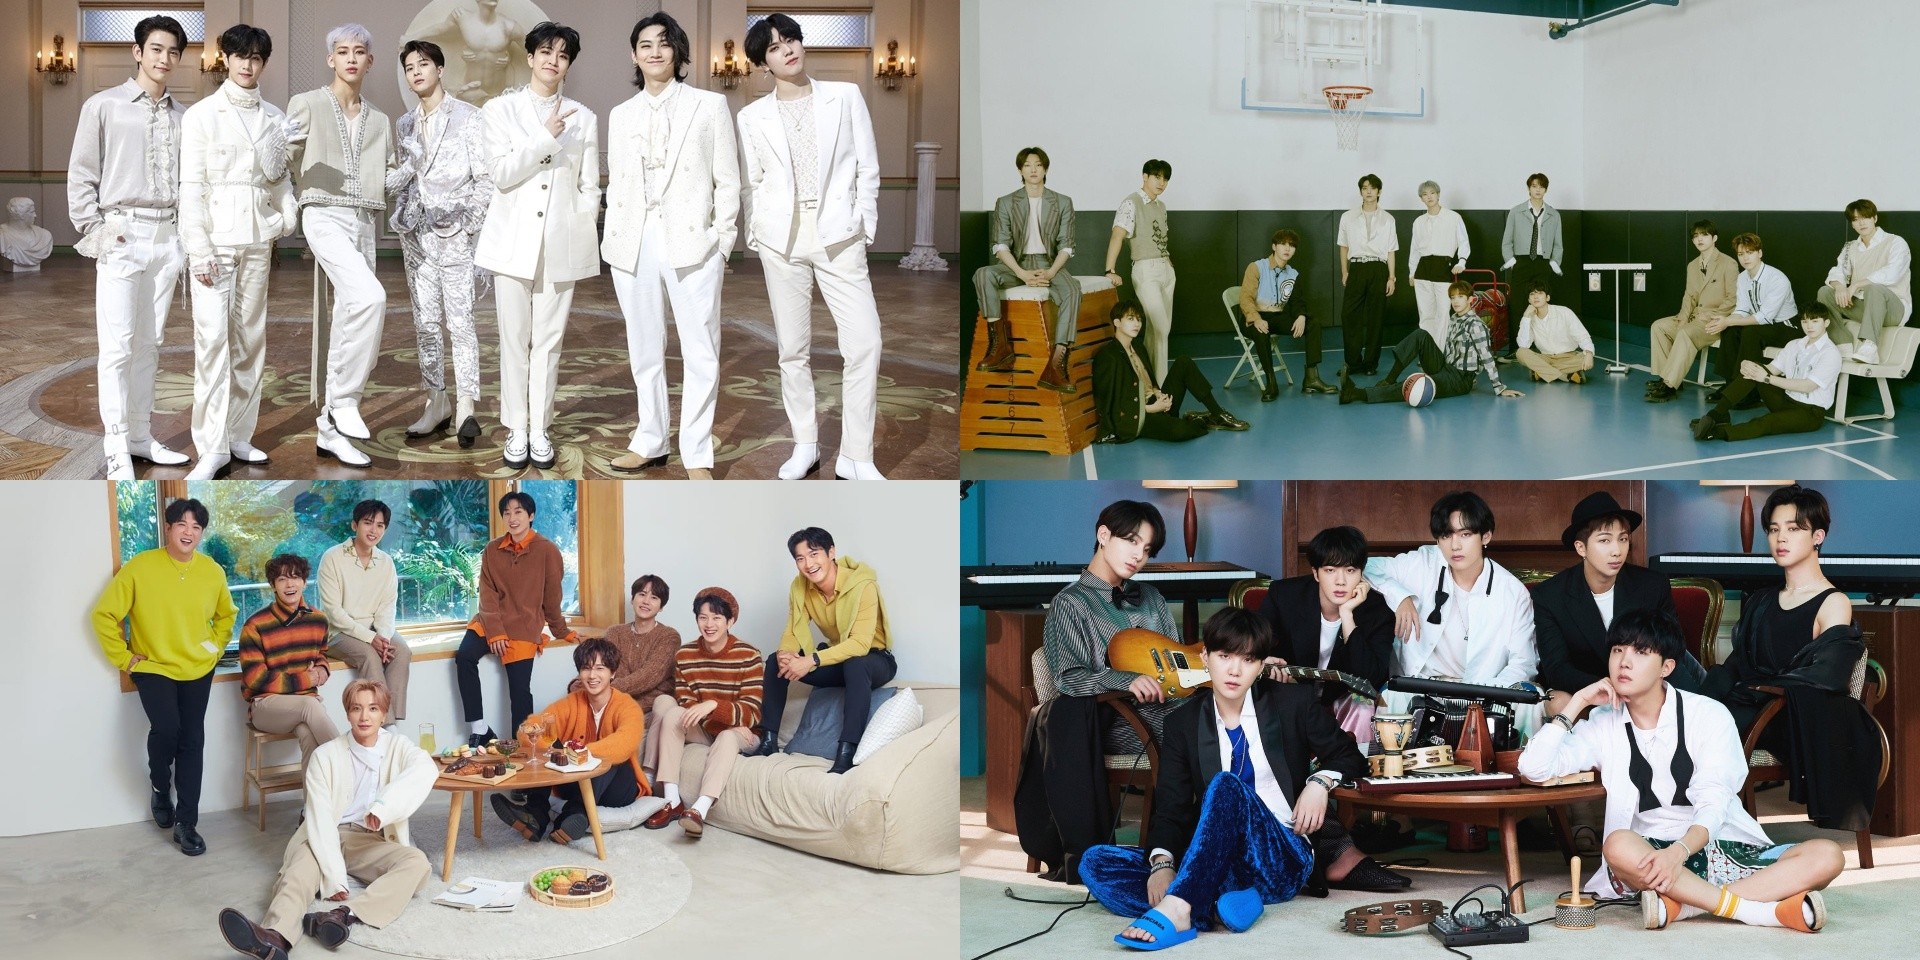 GOT7, SEVENTEEN, Super Junior, BTS, and more to perform at The Fact Music Awards 2020 in December